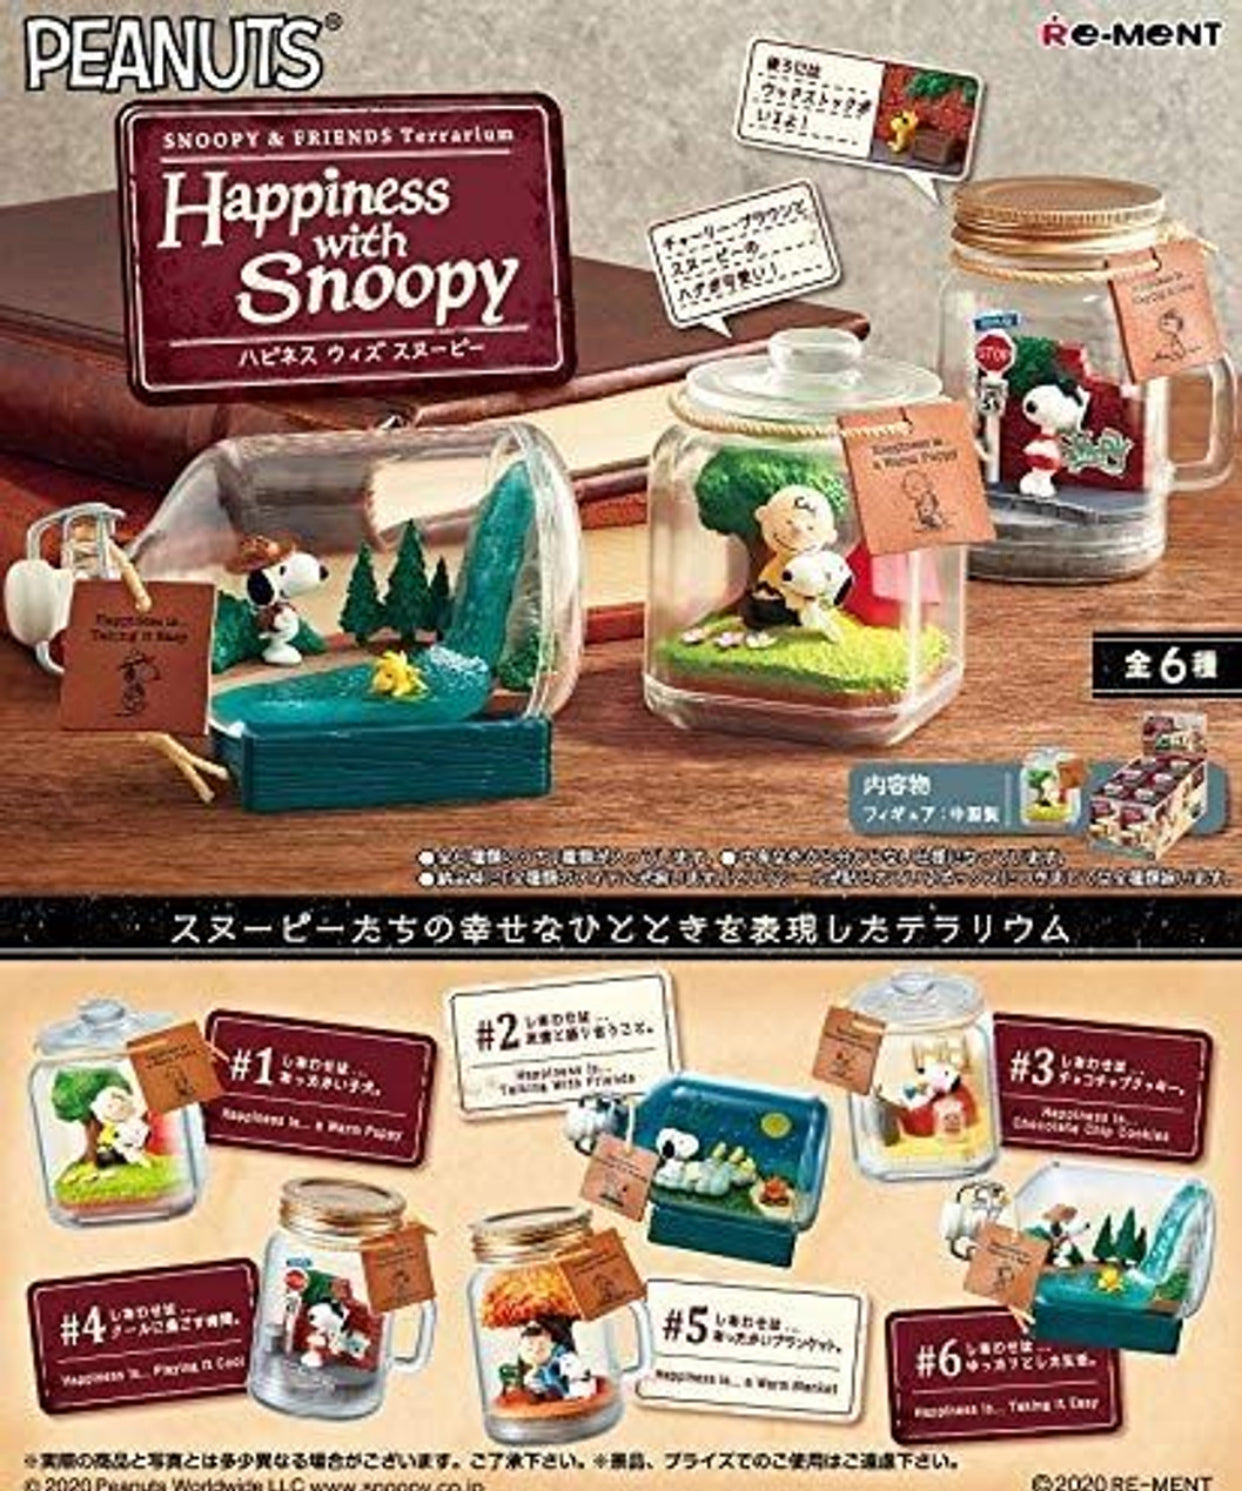 Re-ment Snoopy & Friends Terrarium Happiness with Snoopy